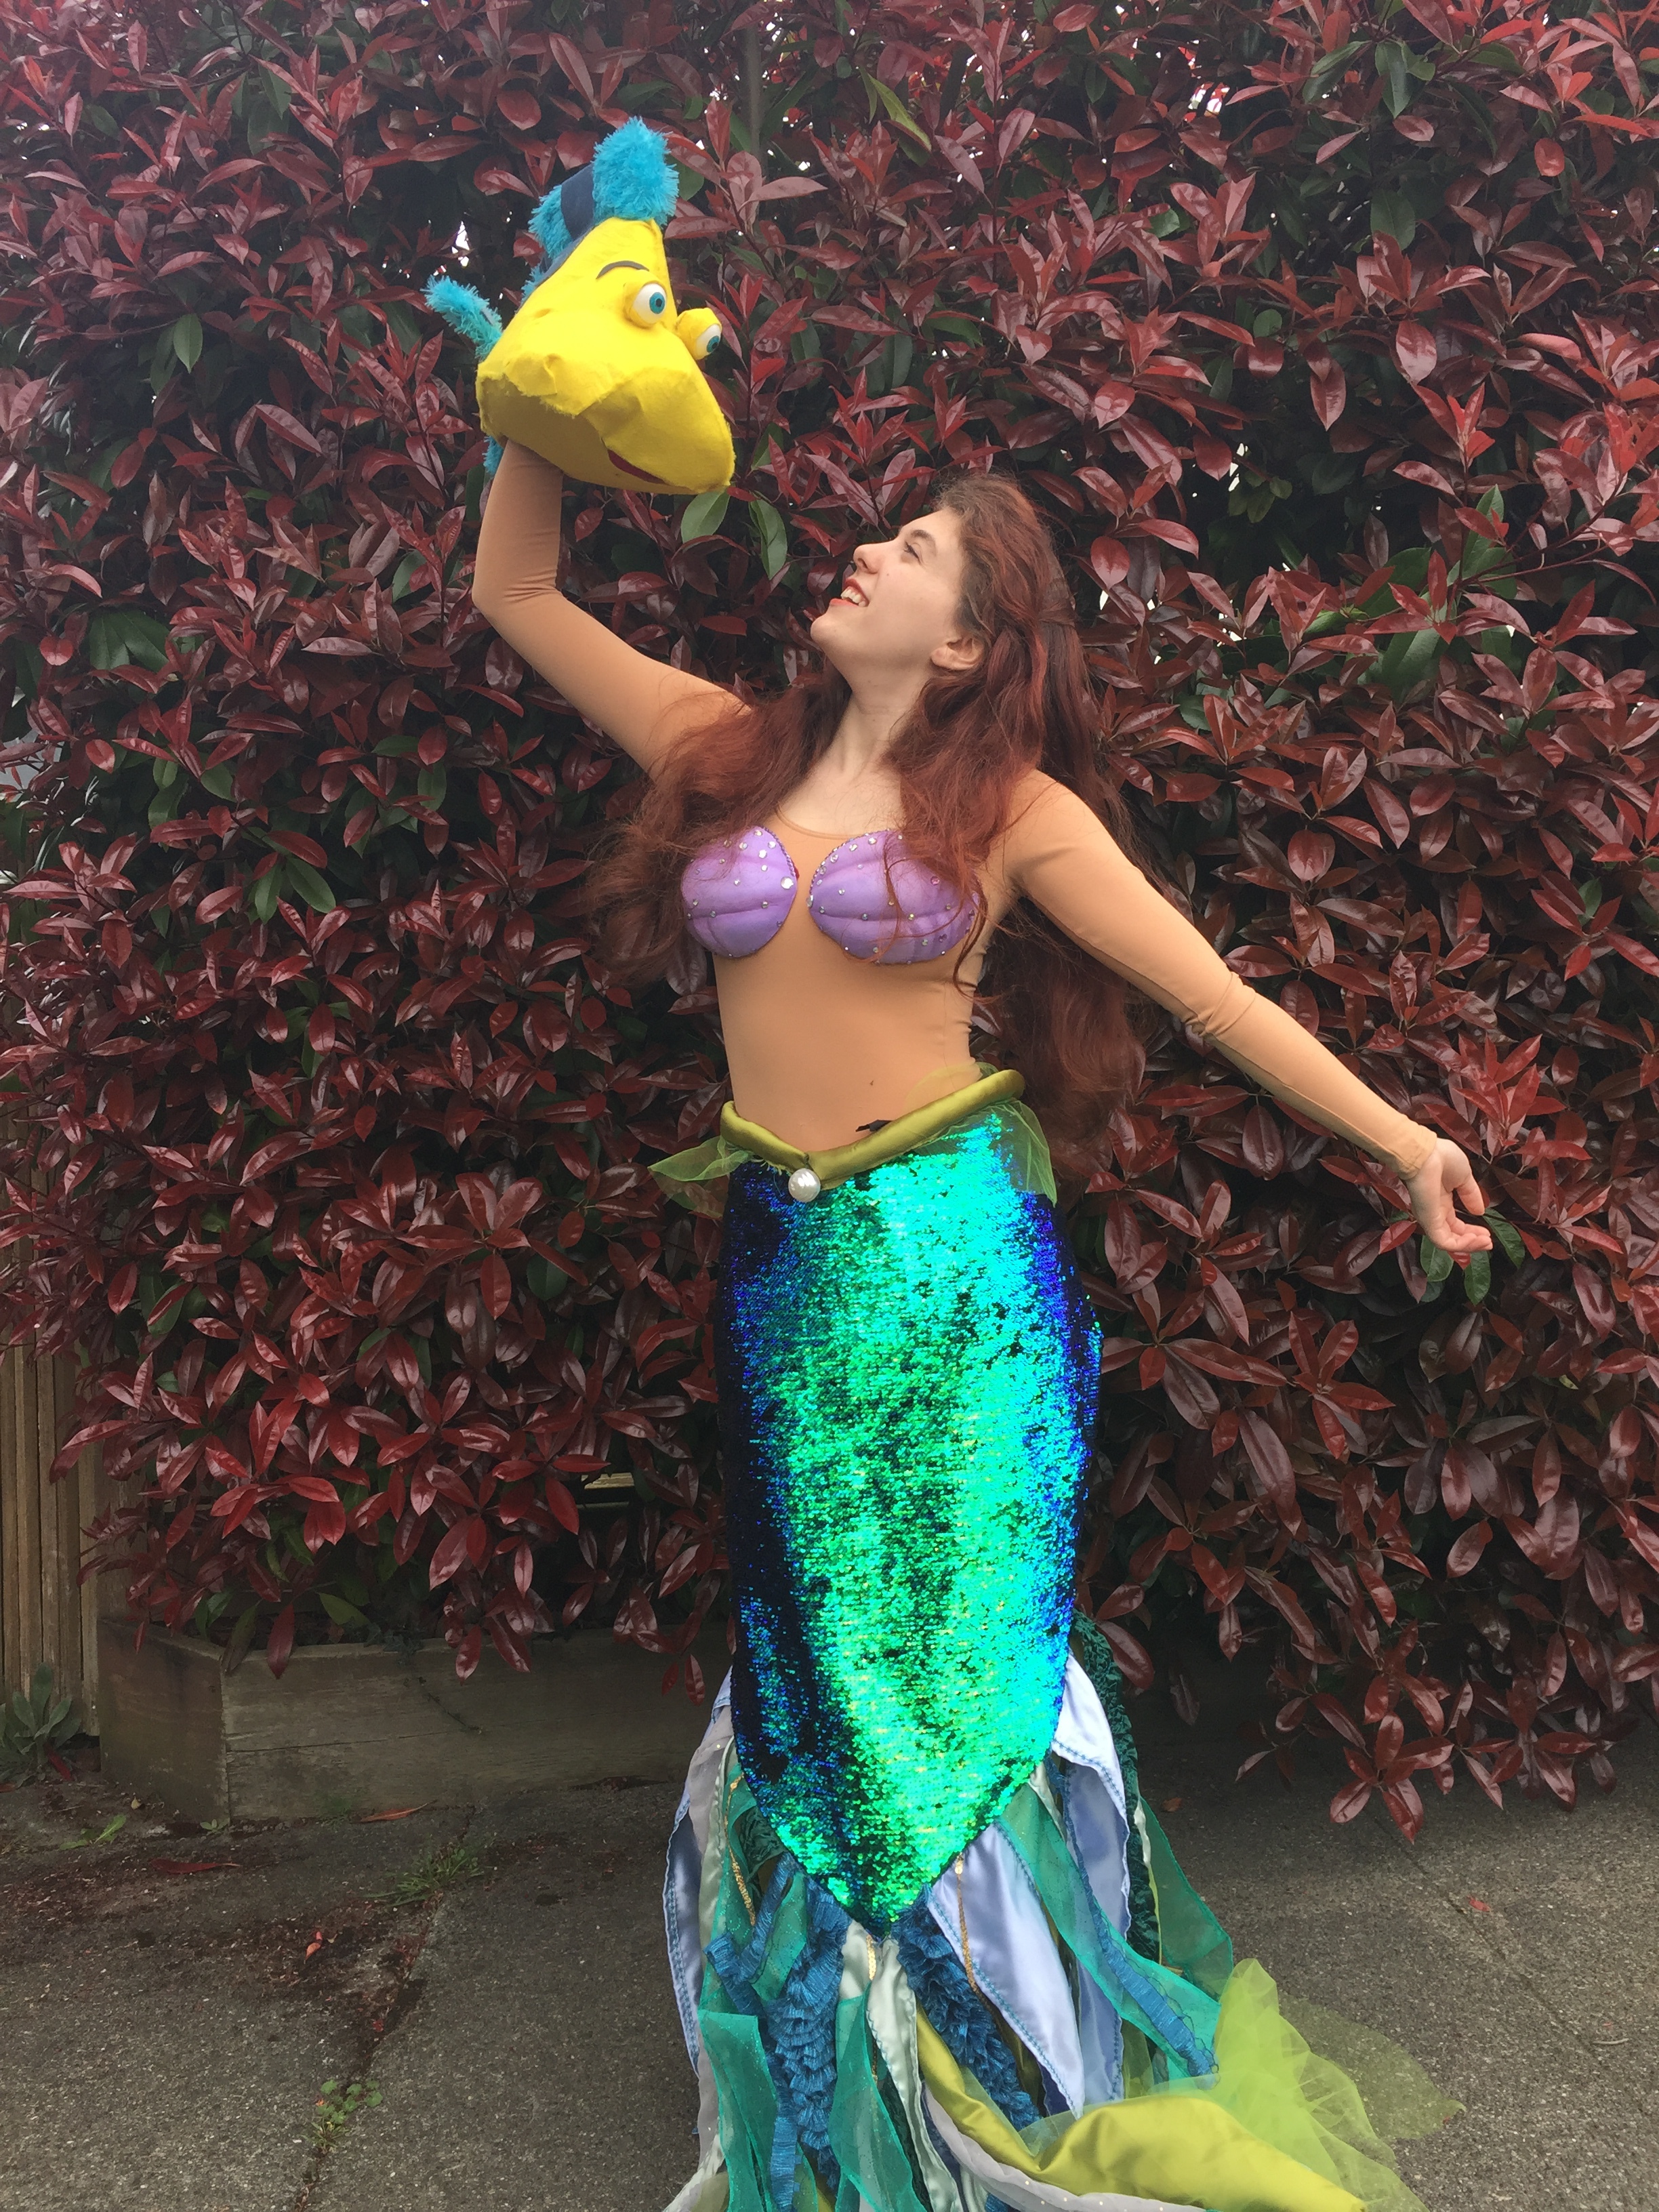  Ariel and Flounder 